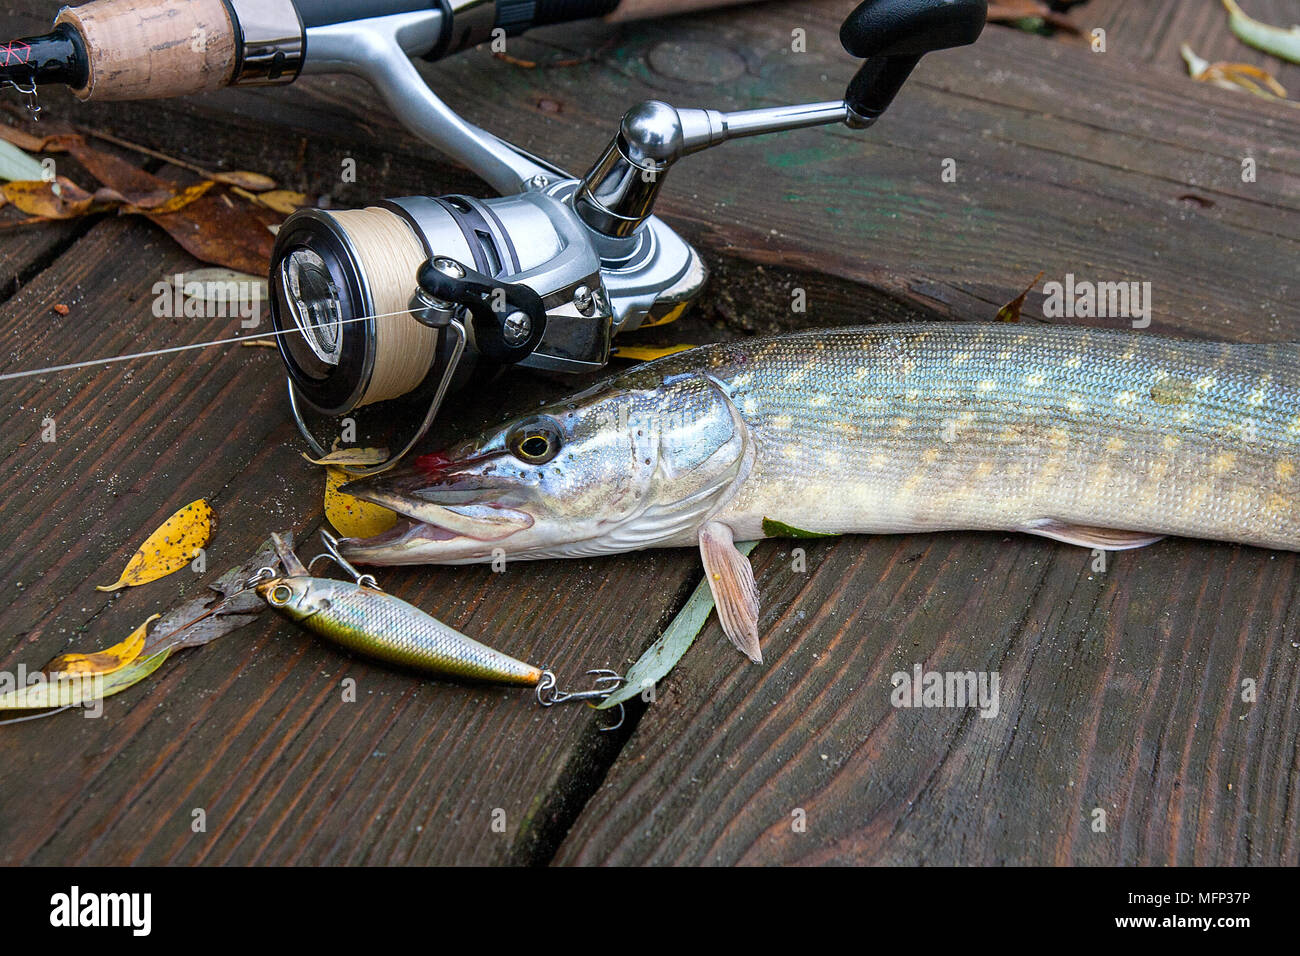 Freshwater Northern pike fish know as Esox Lucius and fishing rod